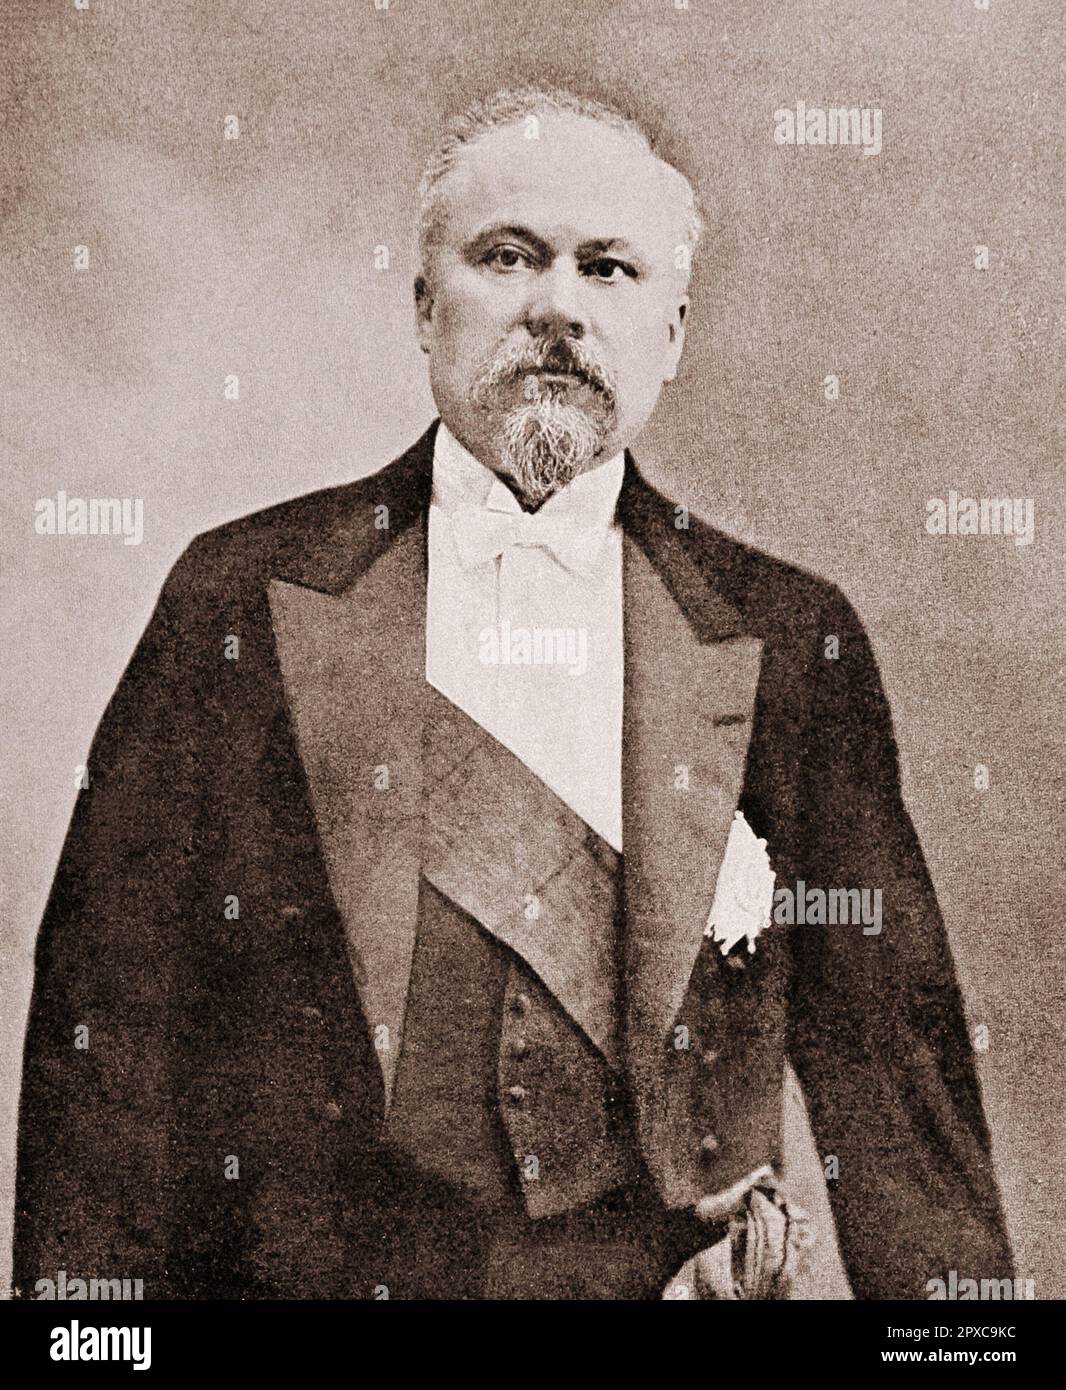 Raymond Poincare.  Raymond Nicolas Landry Poincare (1860 – 1934) was a French statesman who served three times as 58th Prime Minister of France, and as President of France from 1913 to 1920. Stock Photo